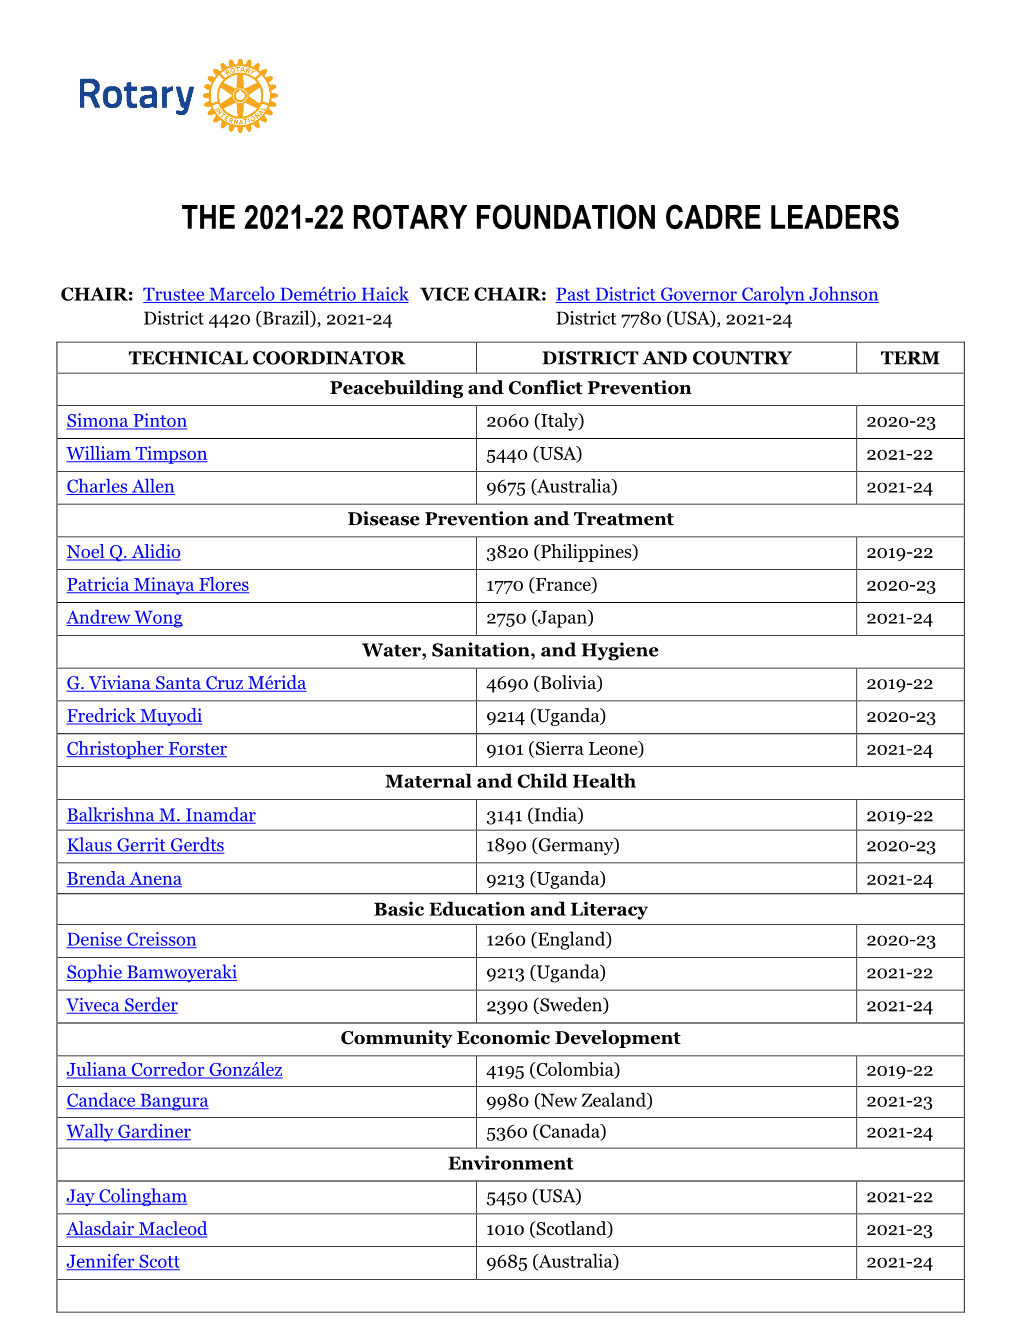 The 2021-22 Rotary Foundation Cadre Leaders